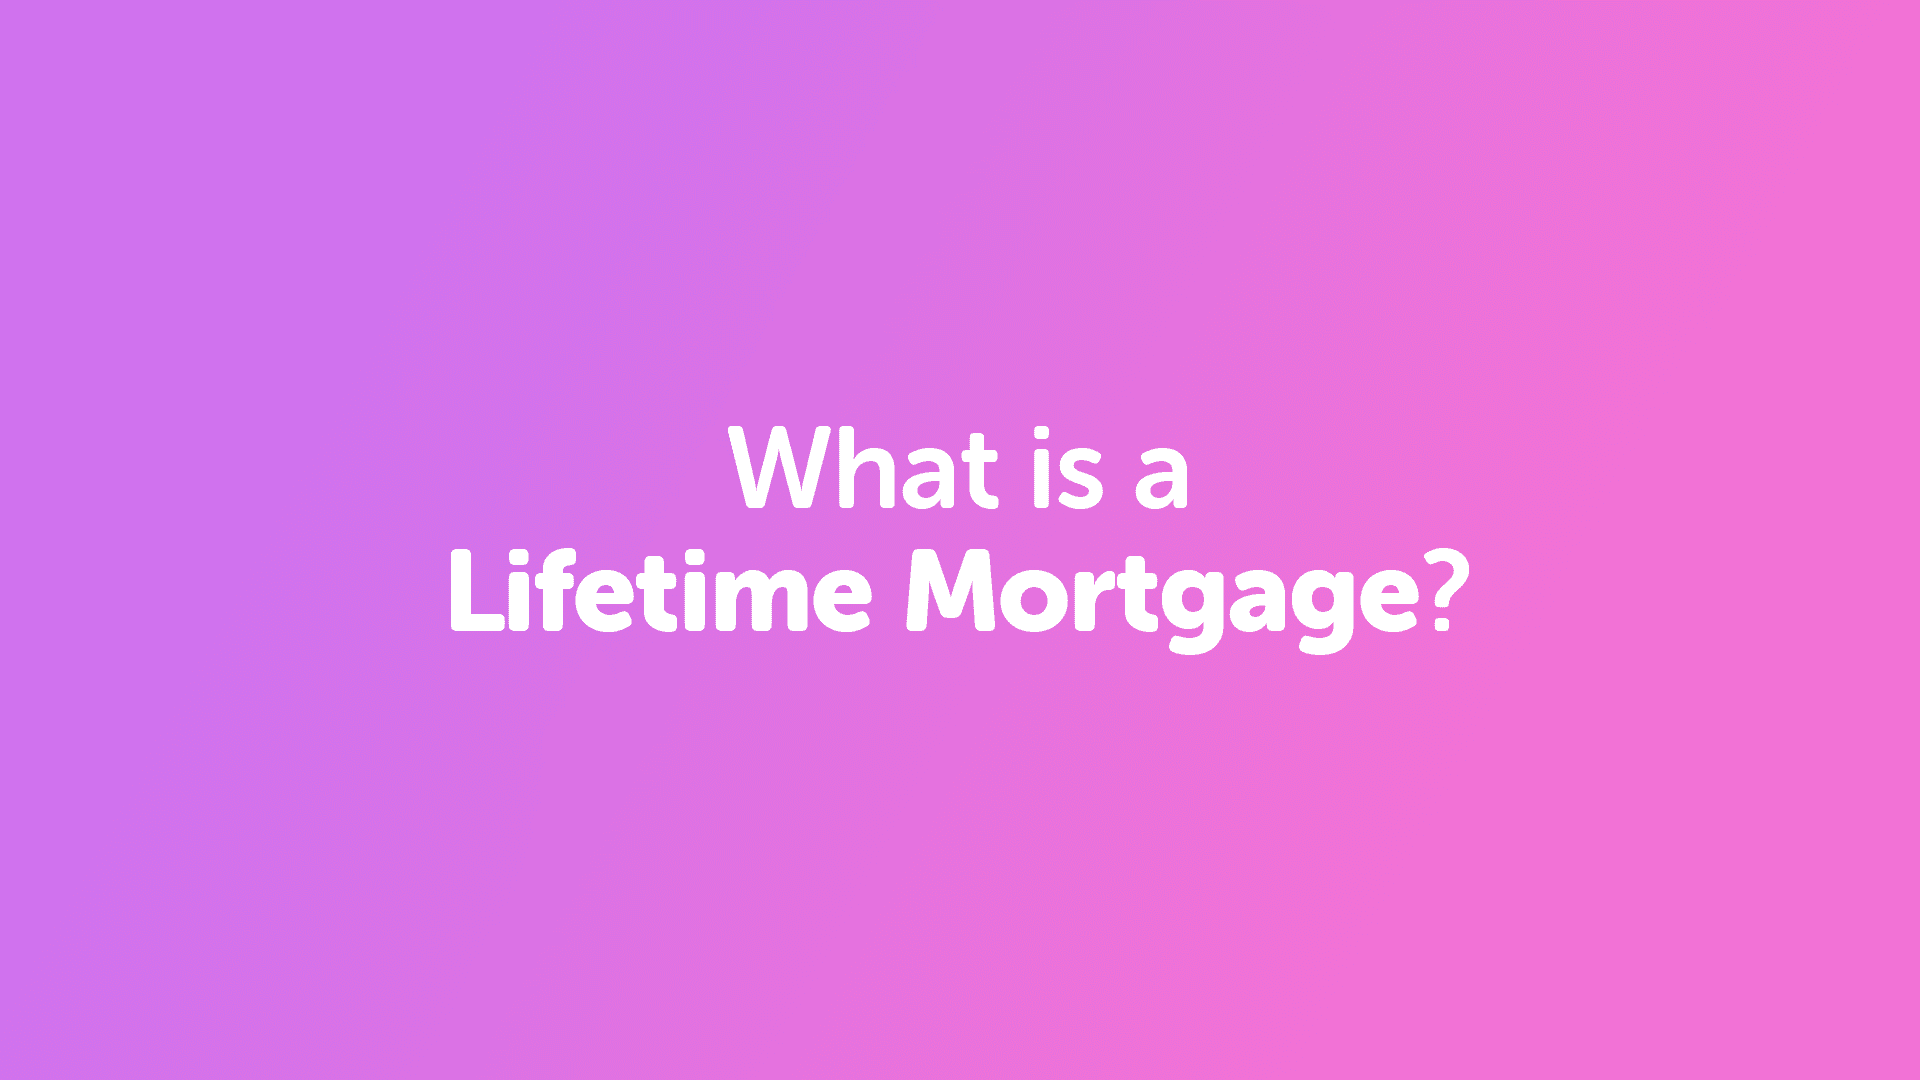 What is a Lifetime Mortgage?